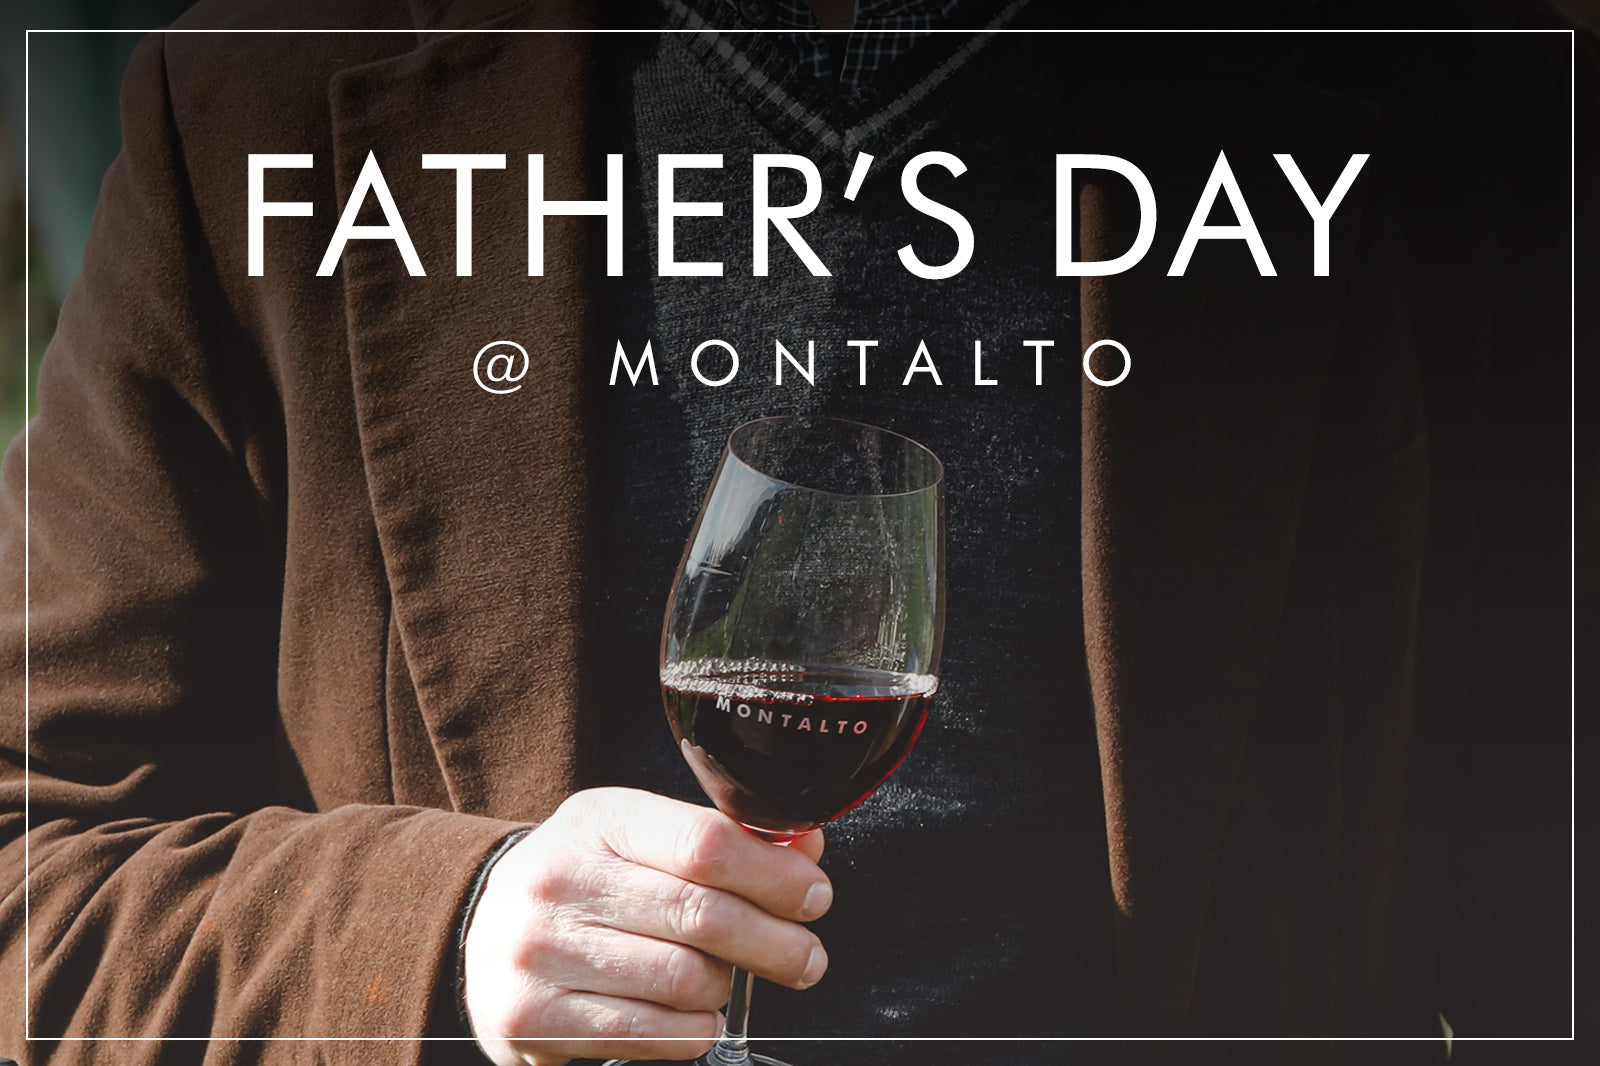 Father's Day at Montalto